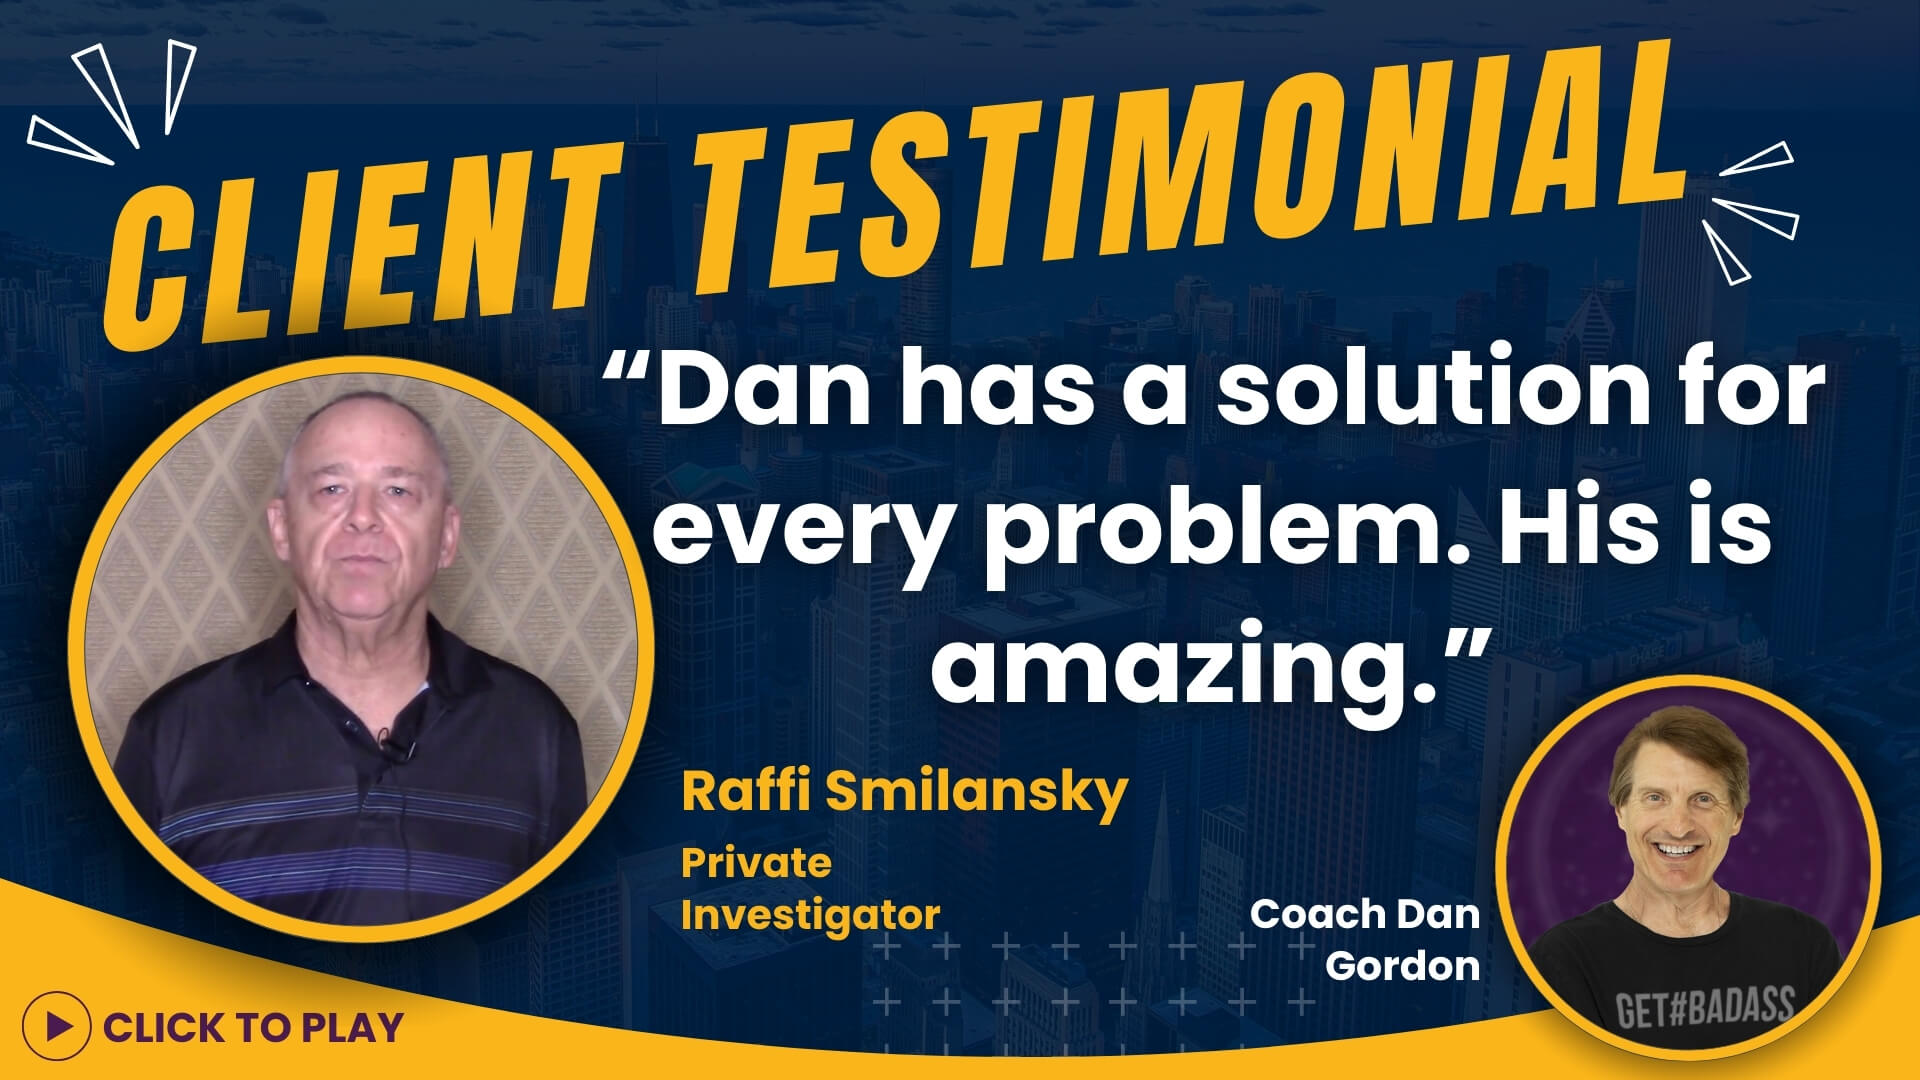 Thumbnail for Raffi Smilansky's client testimonial video, lauding Coach Dan Gordon's problem-solving skills, with a 'CLICK TO PLAY' call-to-action.